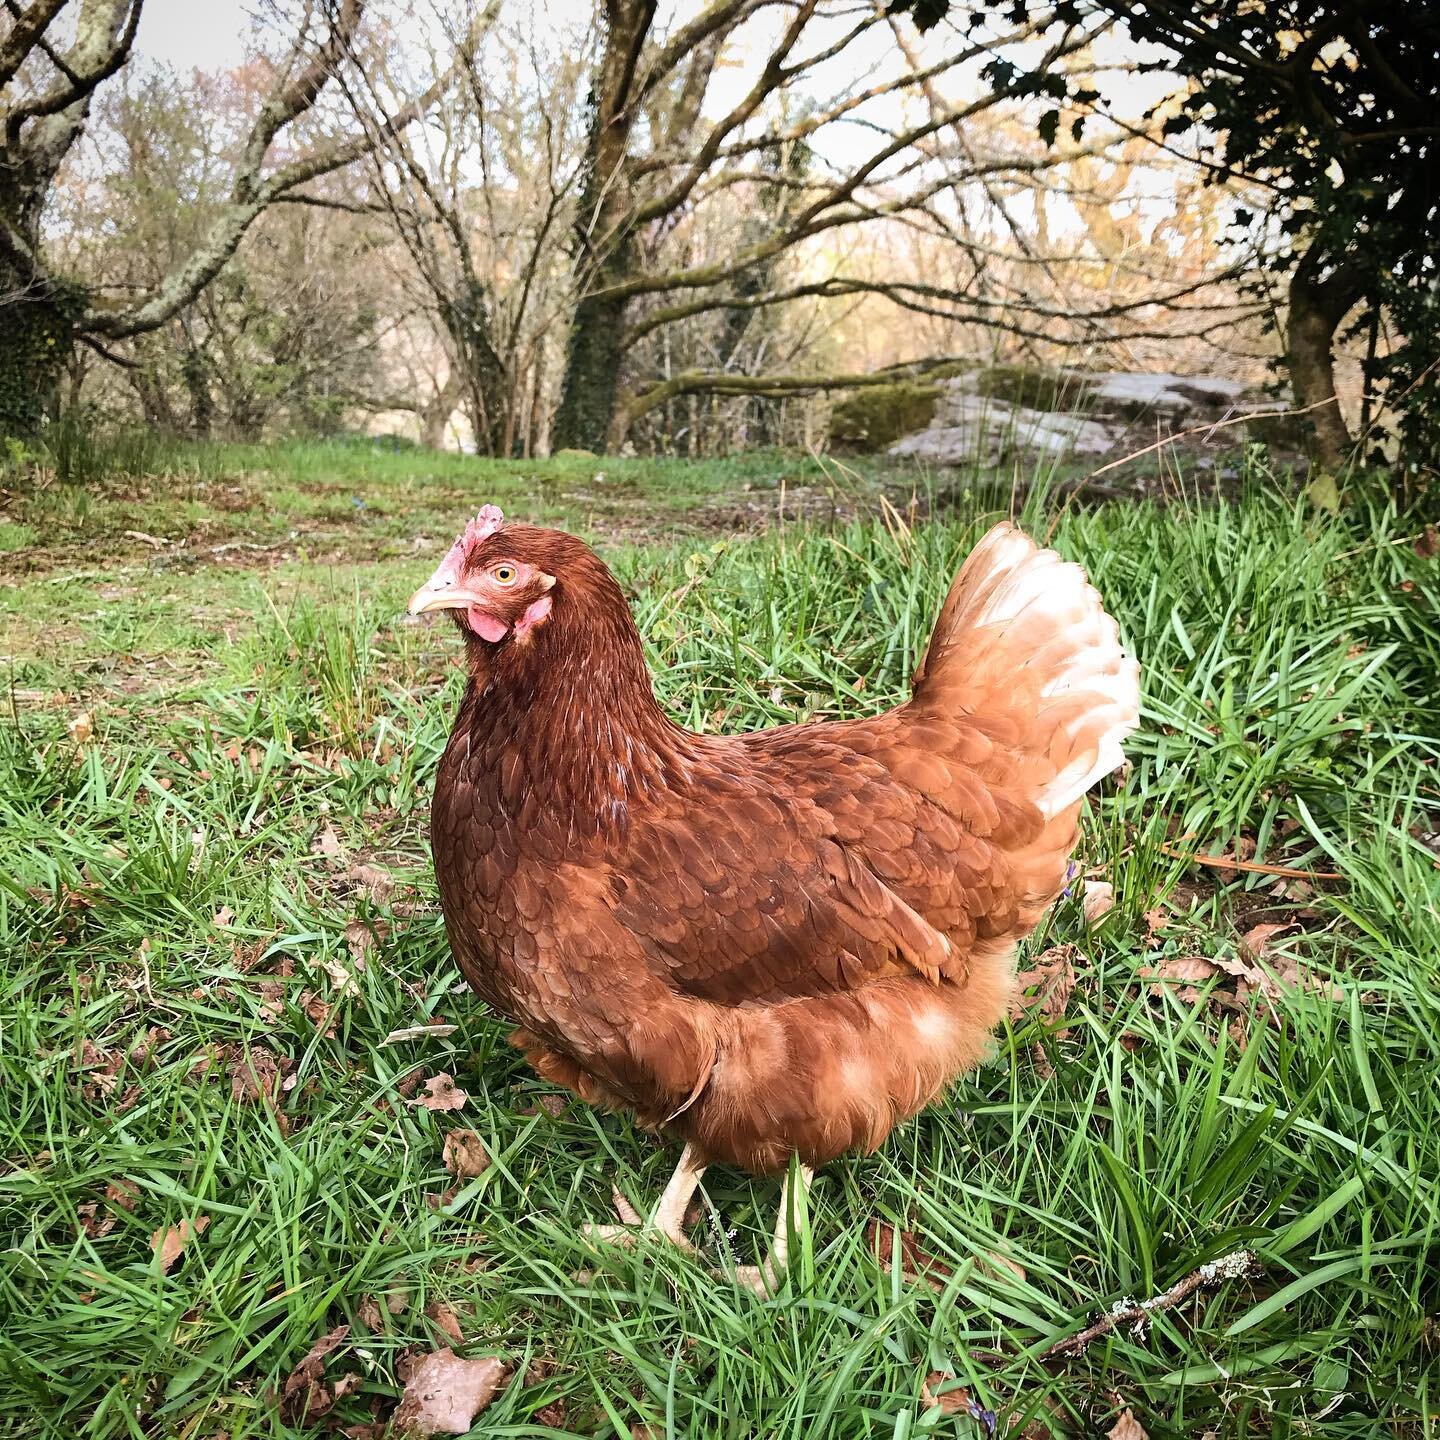 Staying with us this year? Be sure to try out our free range eggs laid by our very own forest-dwelling chickens! 🌳🐥🪵

Our girls roam freely around the site and are very sociable - you may get some unexpected visitors to your pitch! 🥚🐥🥚🐥